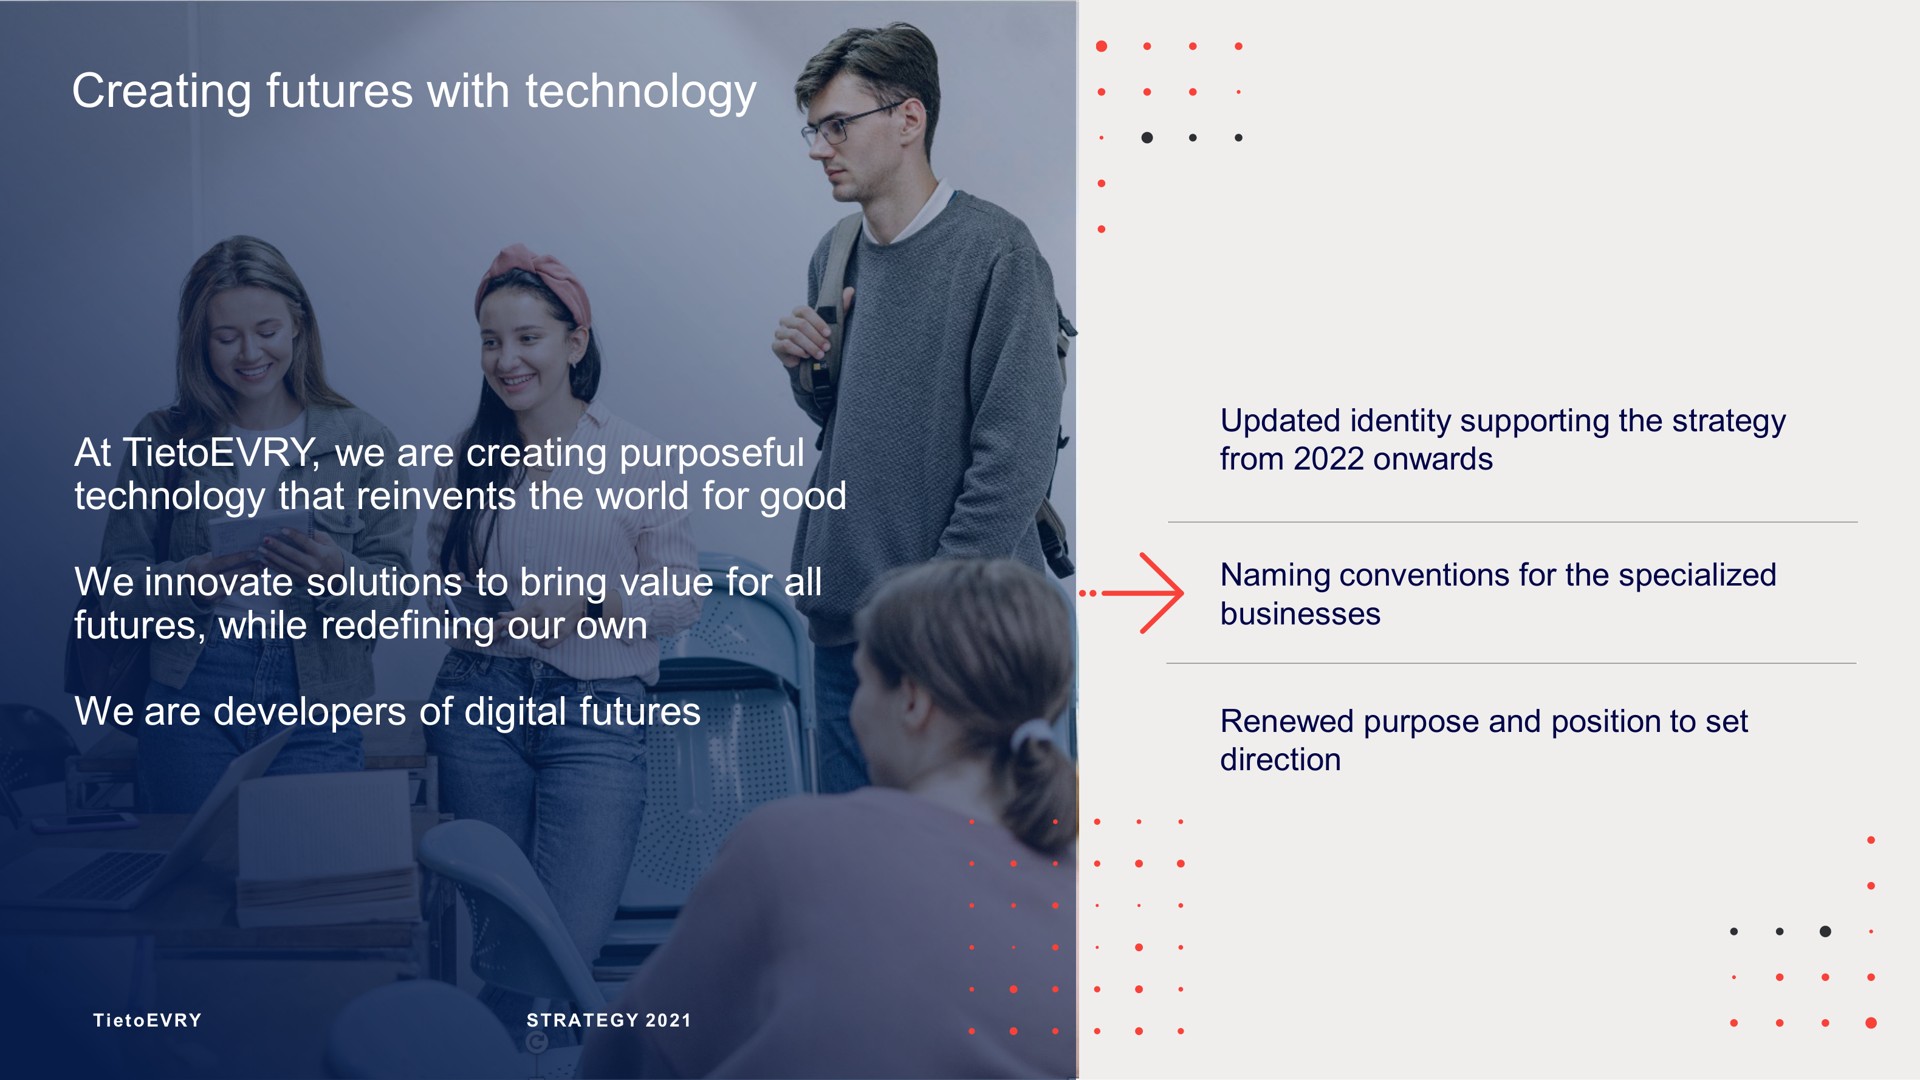 creating futures with technology | Tietoevry